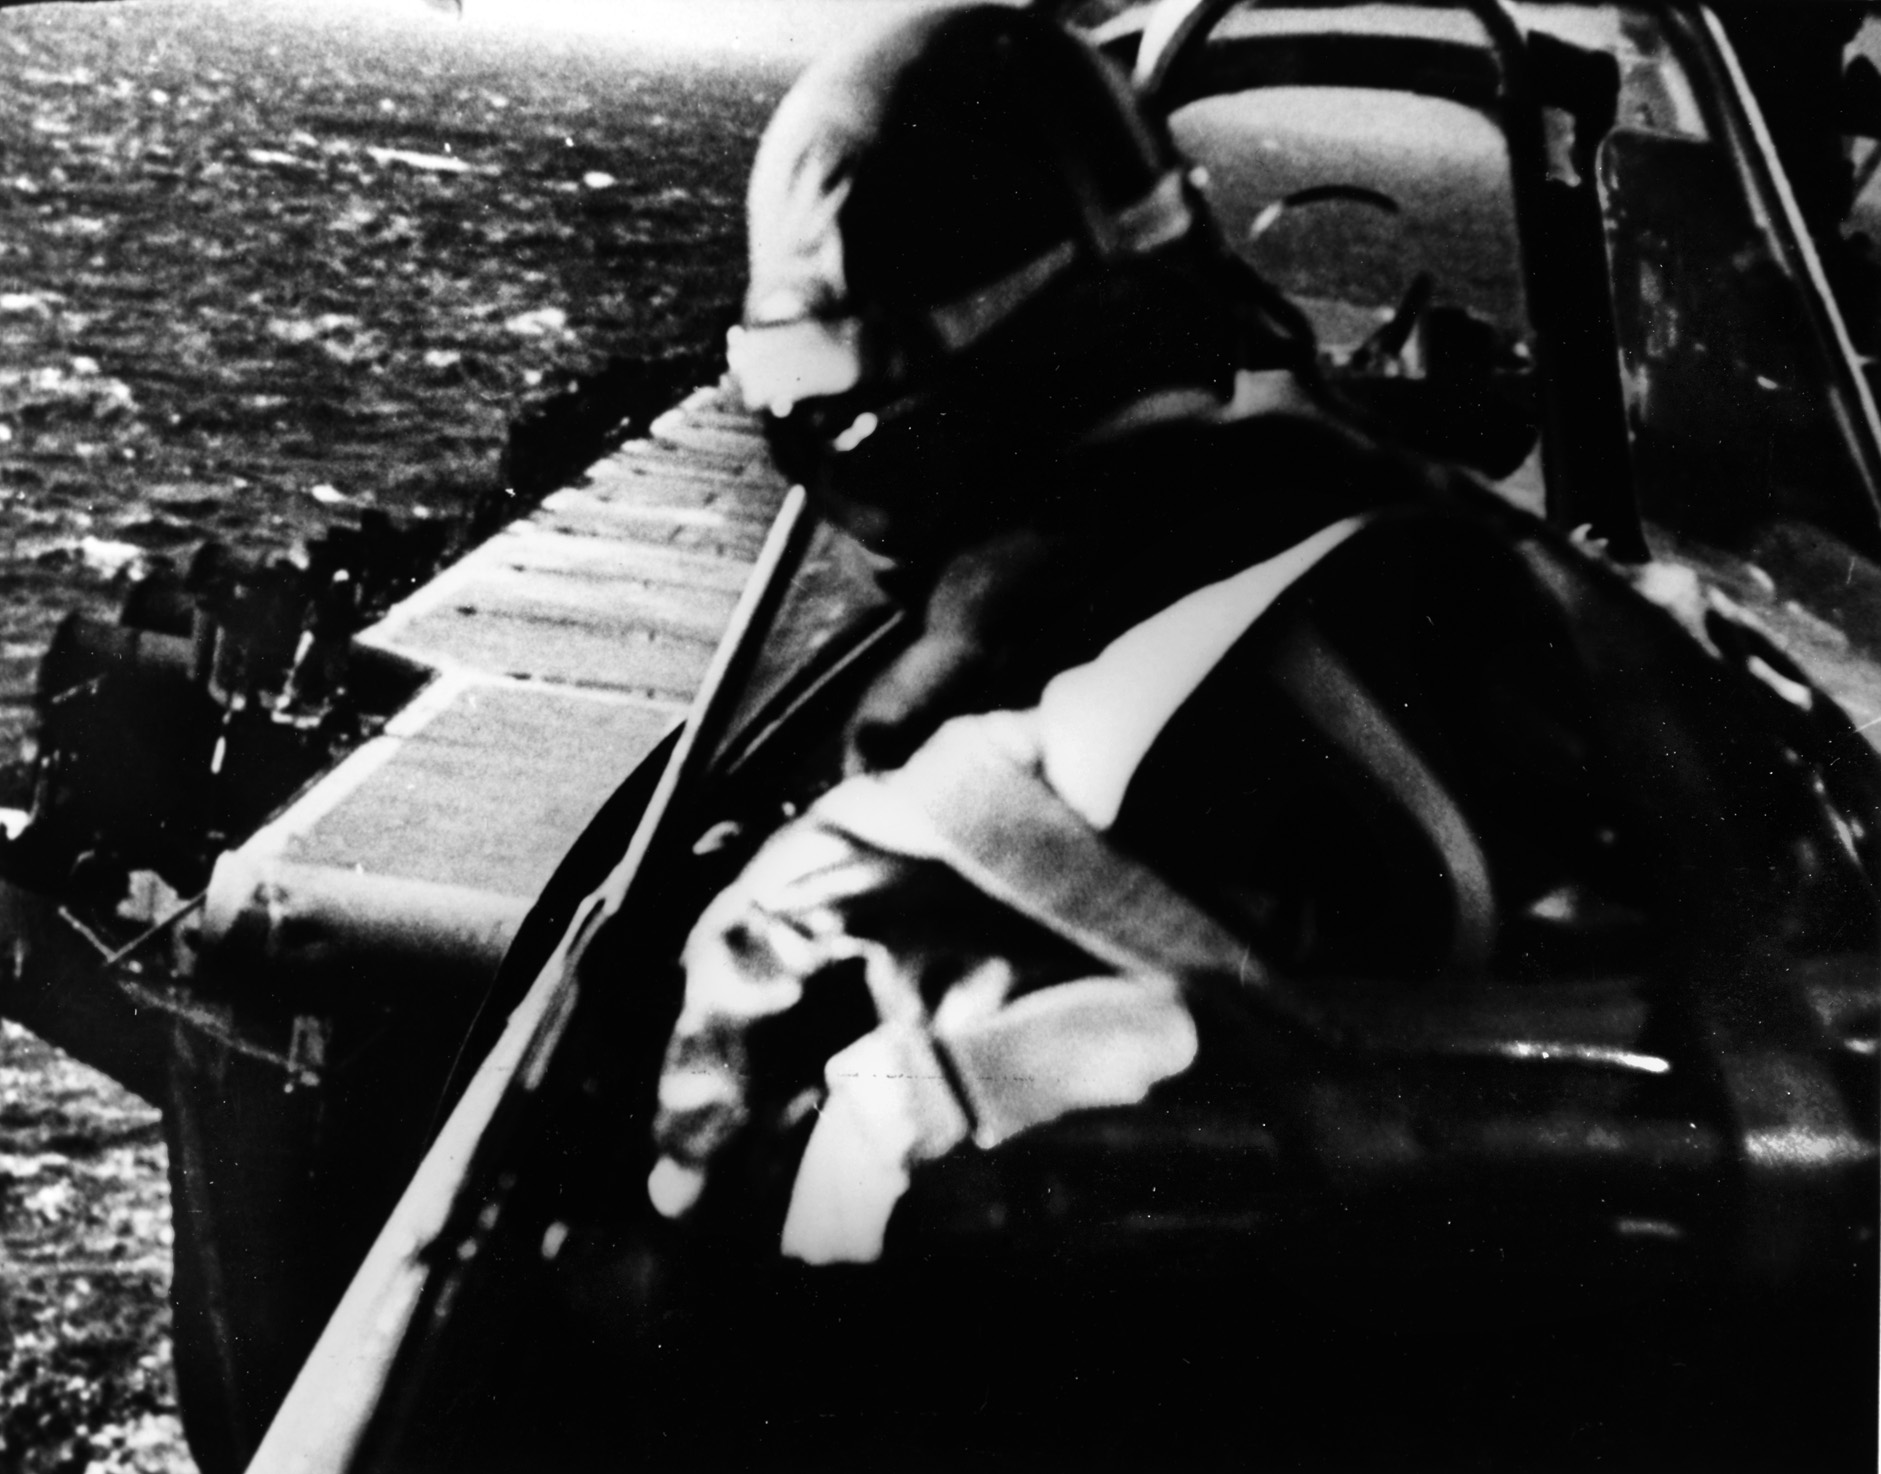 An F4F Wildcat prepares to land on the USS Ranger as seen from a camera mounted behind the pilot. The carrier’s successful attack on German shipping severely disrupted for several months the shipment of iron ore from northern Norway to Germany.